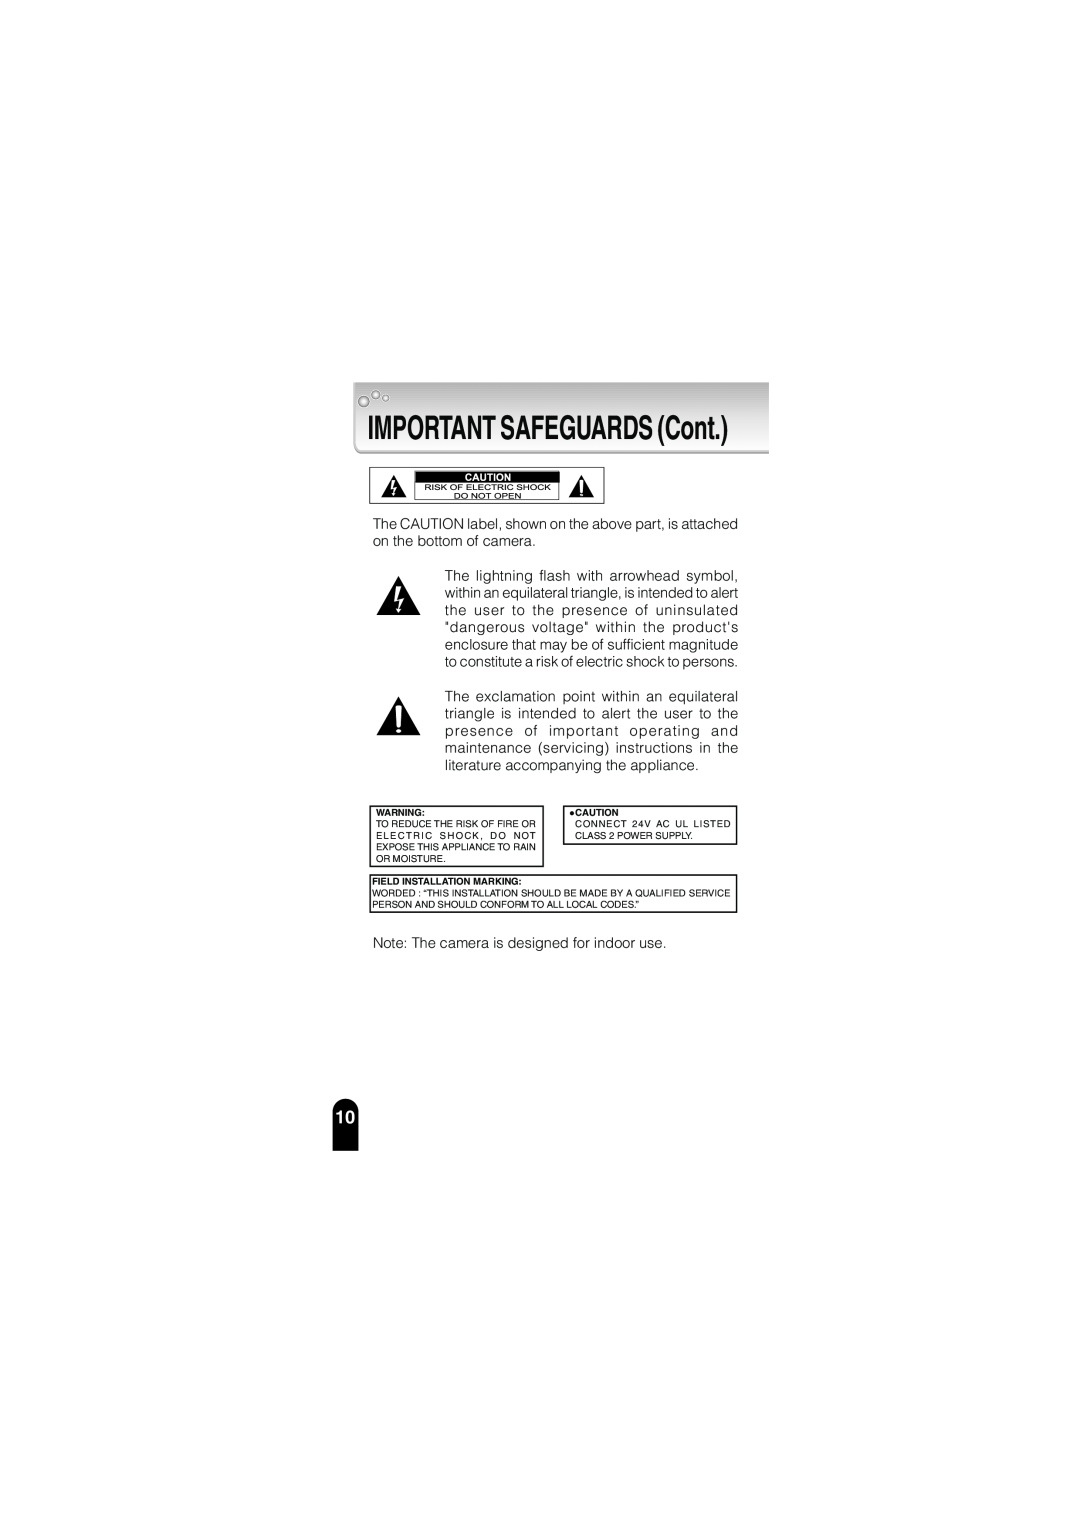 Toshiba IK-WB02A manual IMPORTANT SAFEGUARDS Cont, Note The camera is designed for indoor use 